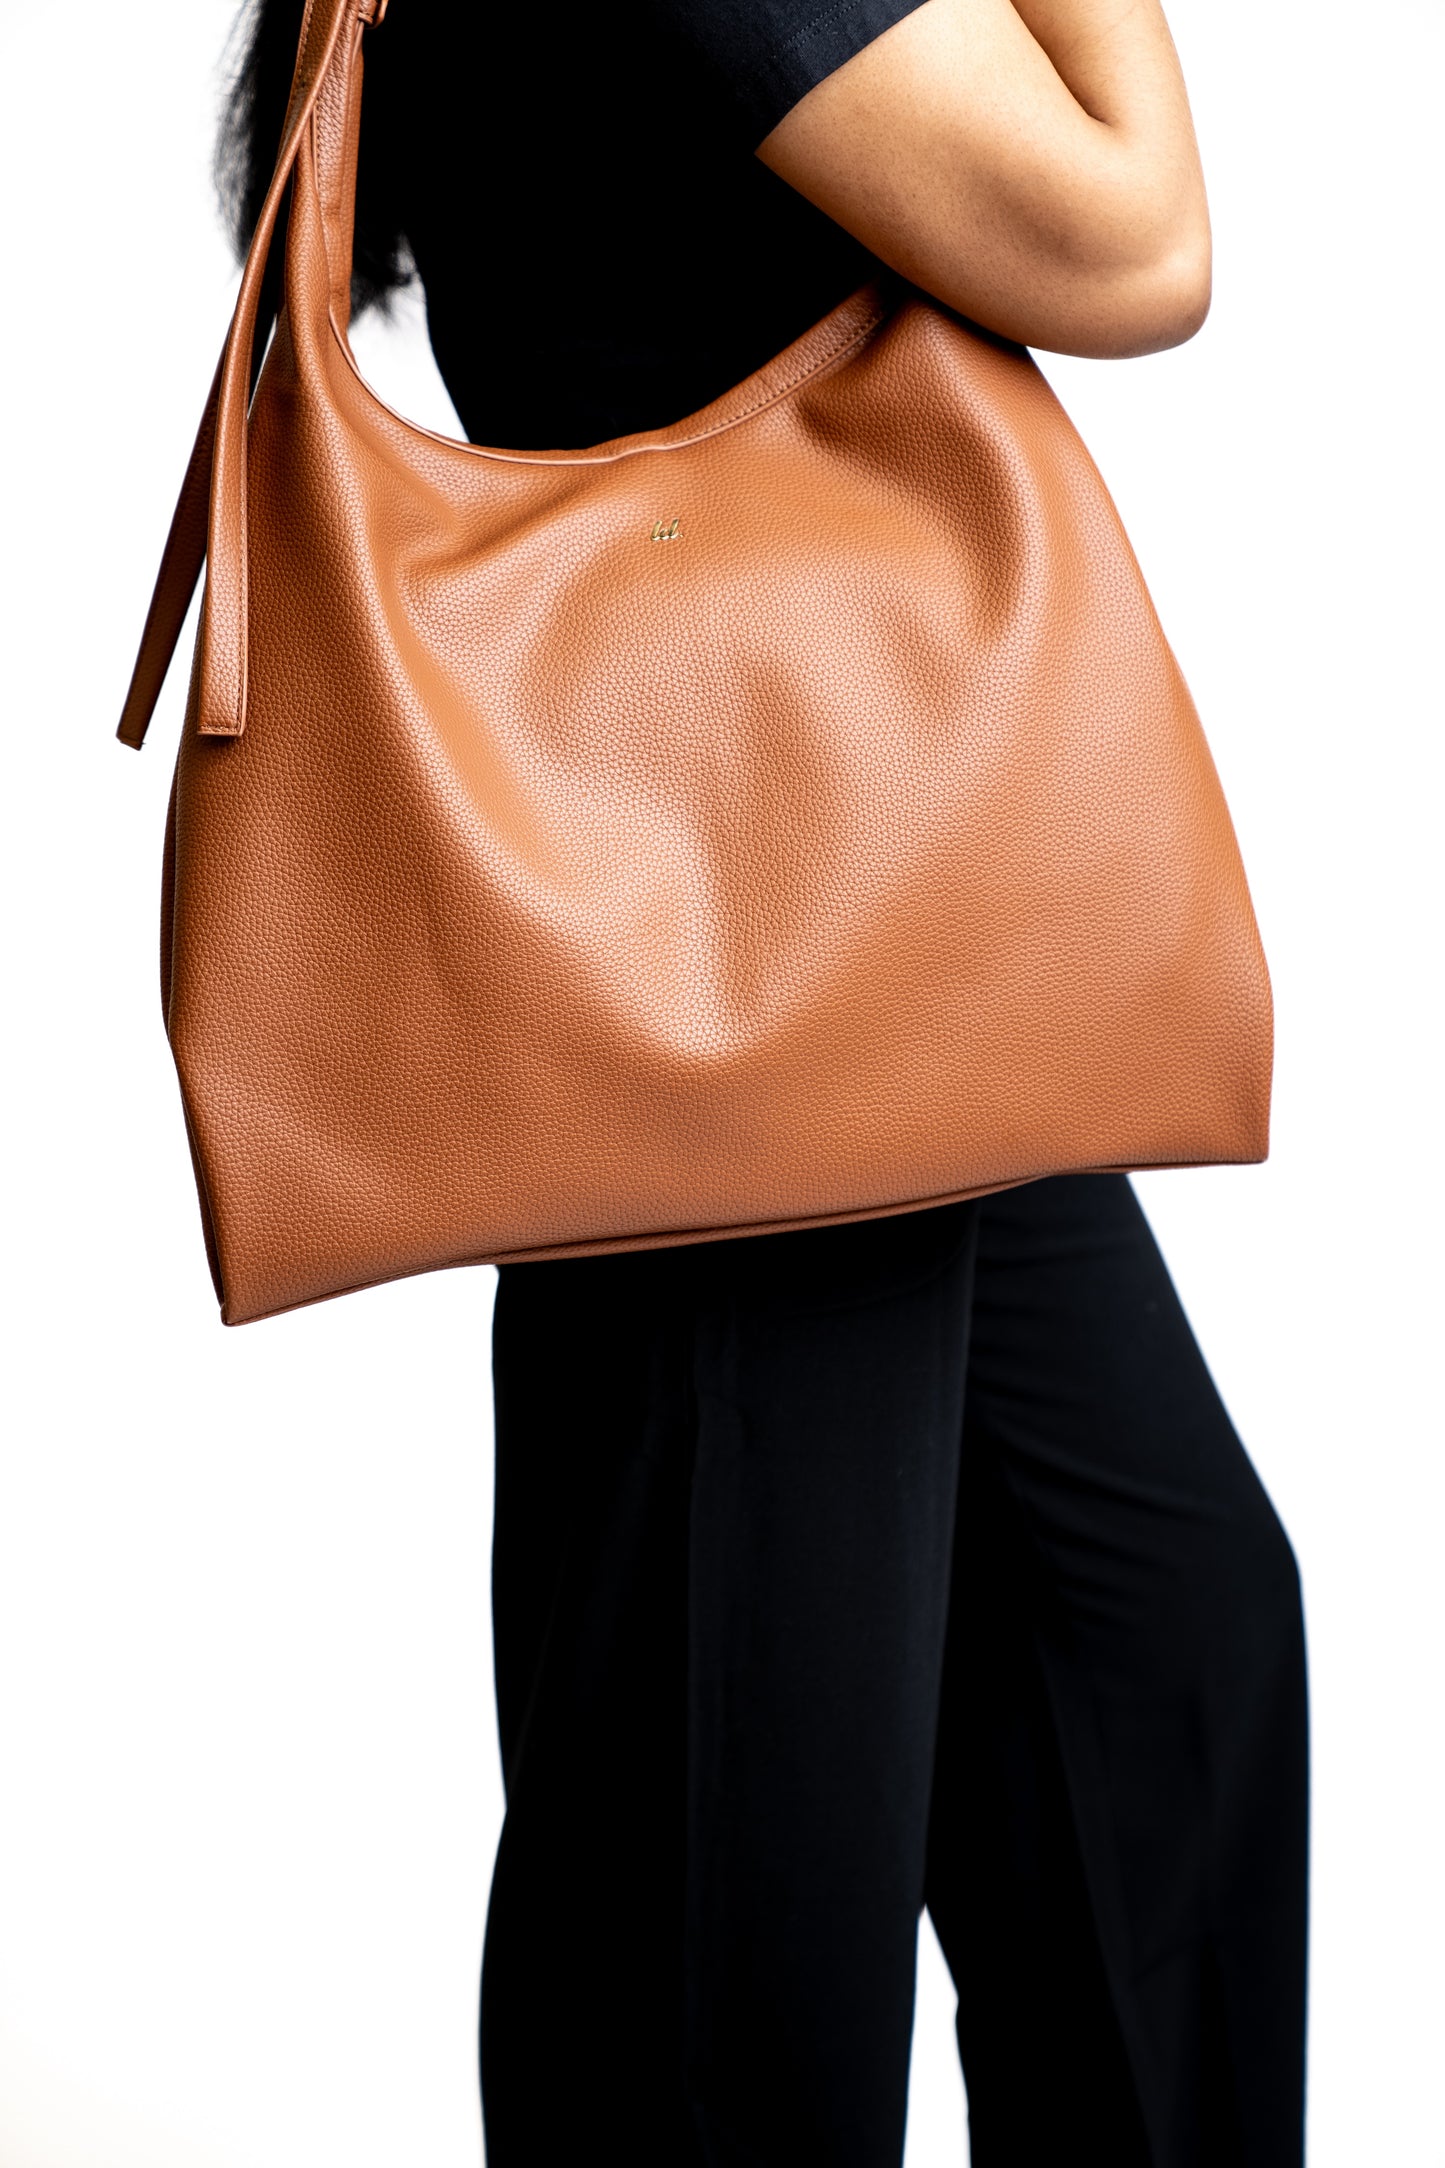 The Slouch Tote